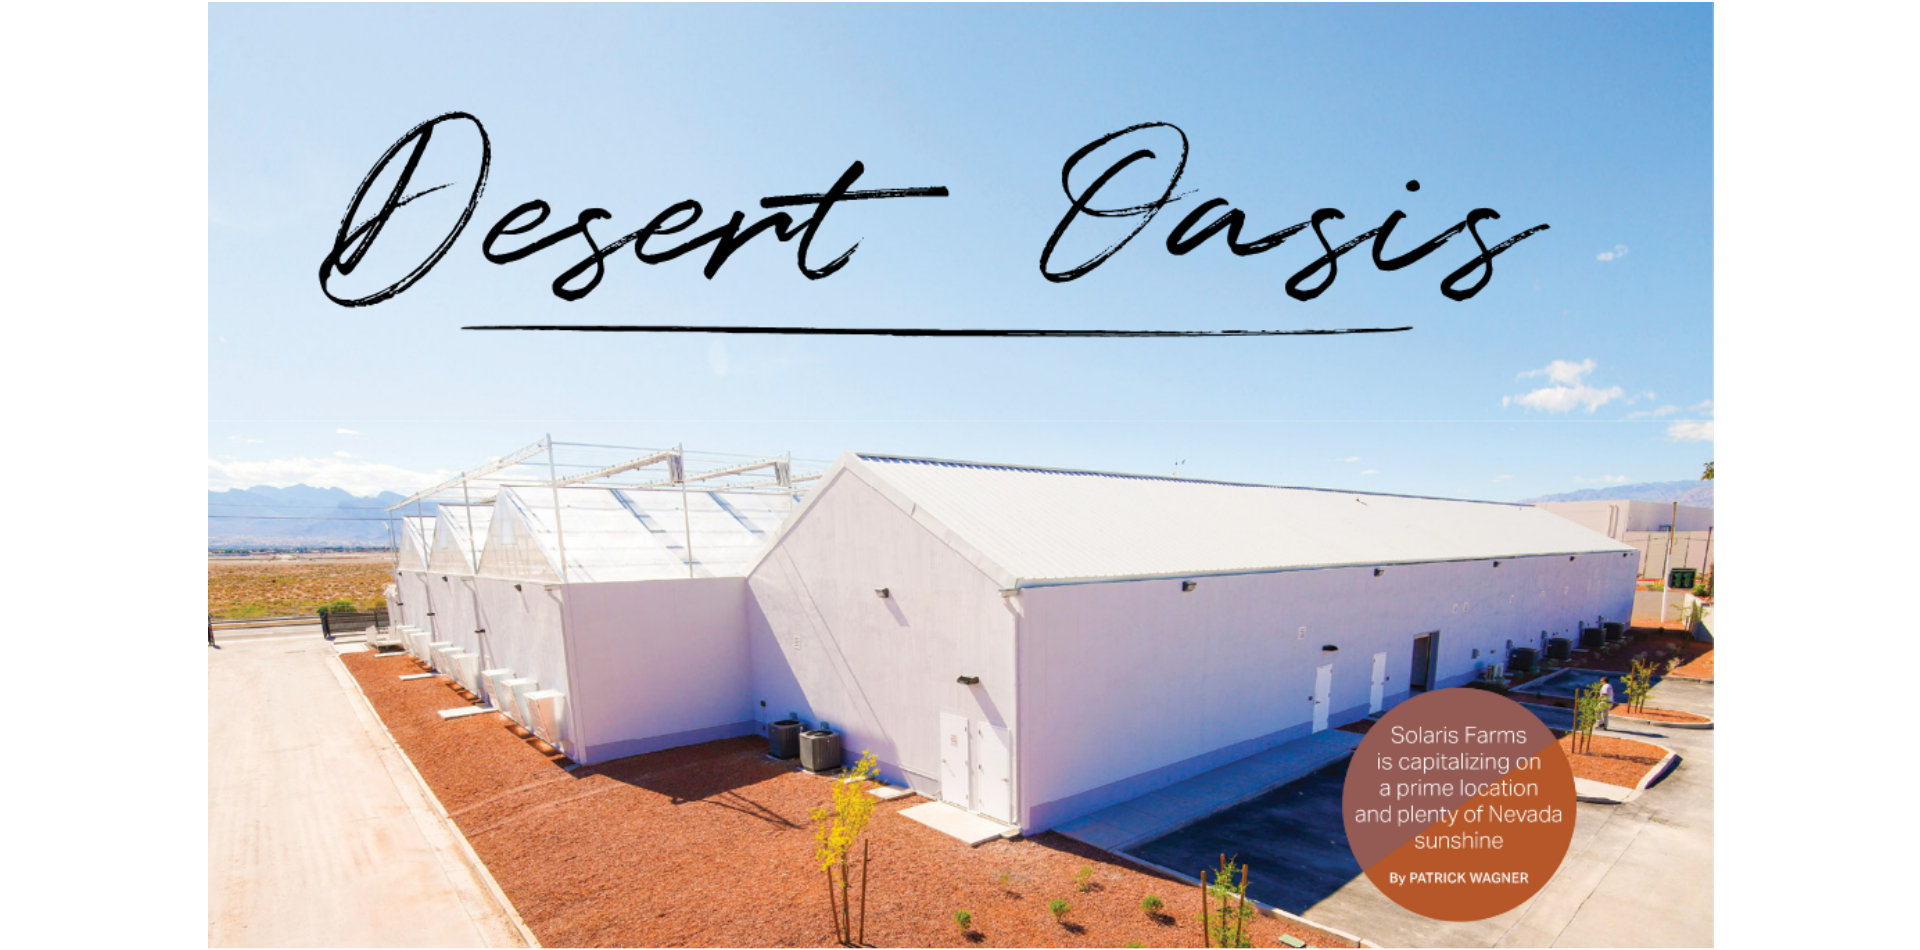 Desert Oasis | Solaris Farms is capitalizing on a prime location and plenty of Nevada sunshine (page 58-61 November issue)